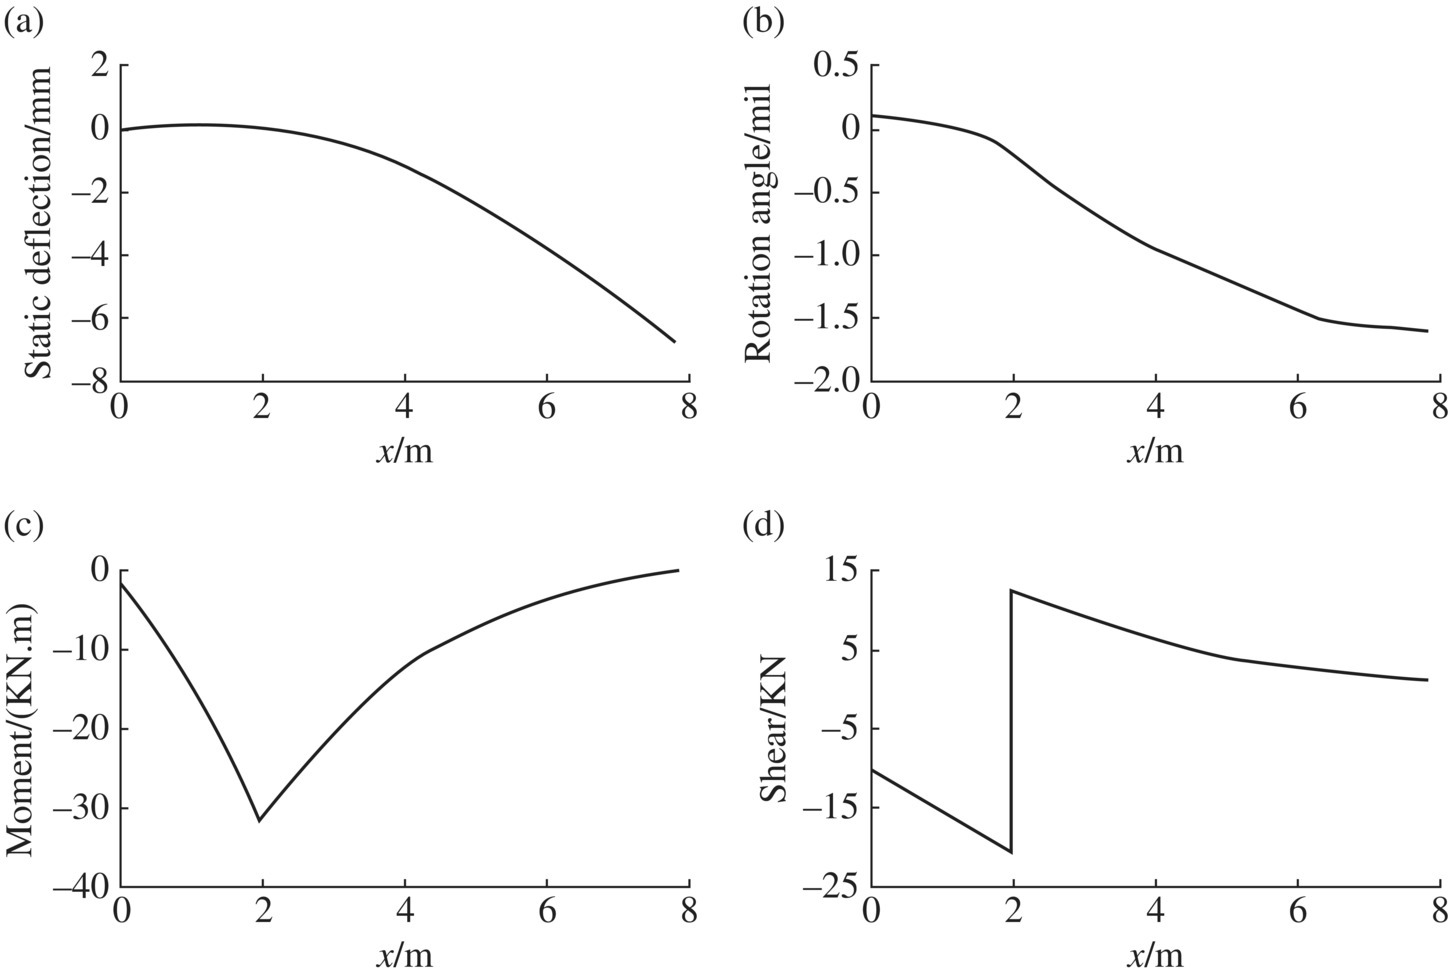 4 Graphs of static deflection/mm (top left), rotation angle/mil (top right), moment/(KN.m) (bottom left), and shear/KN (bottom right) vs. x/m, each displaying curves.